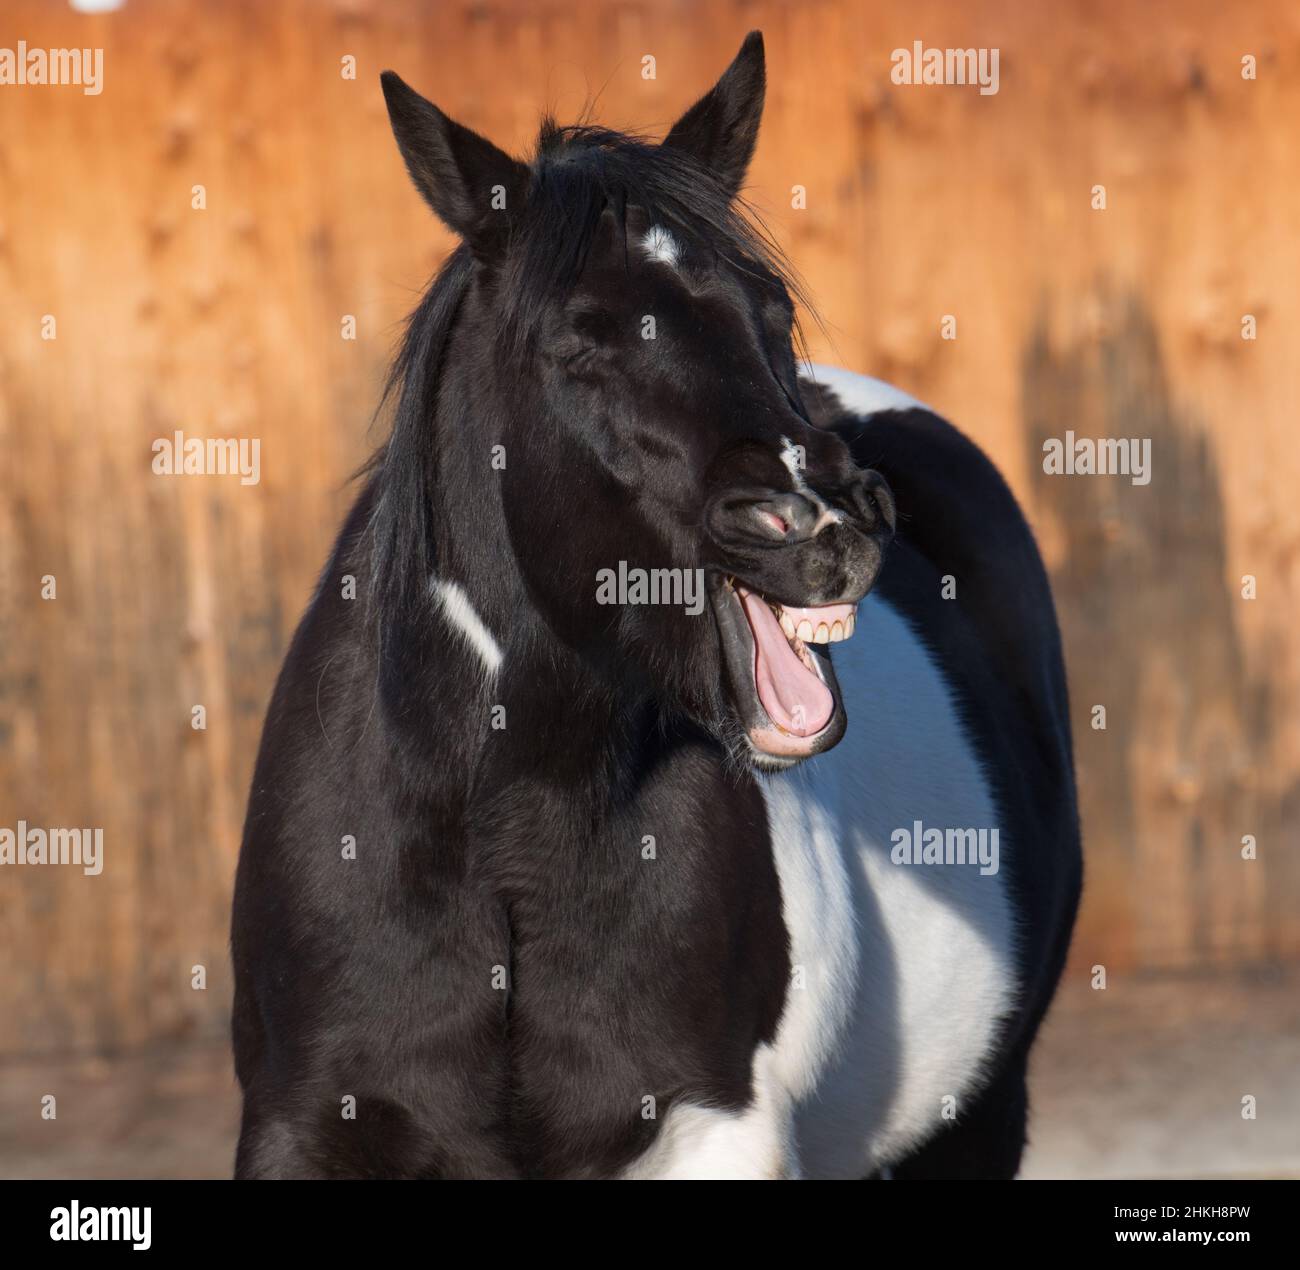 black and white pinto colored horse coughing laughing or yawning humorous funny photo of horse with mouth wide open top teeth and tongue visible Stock Photo